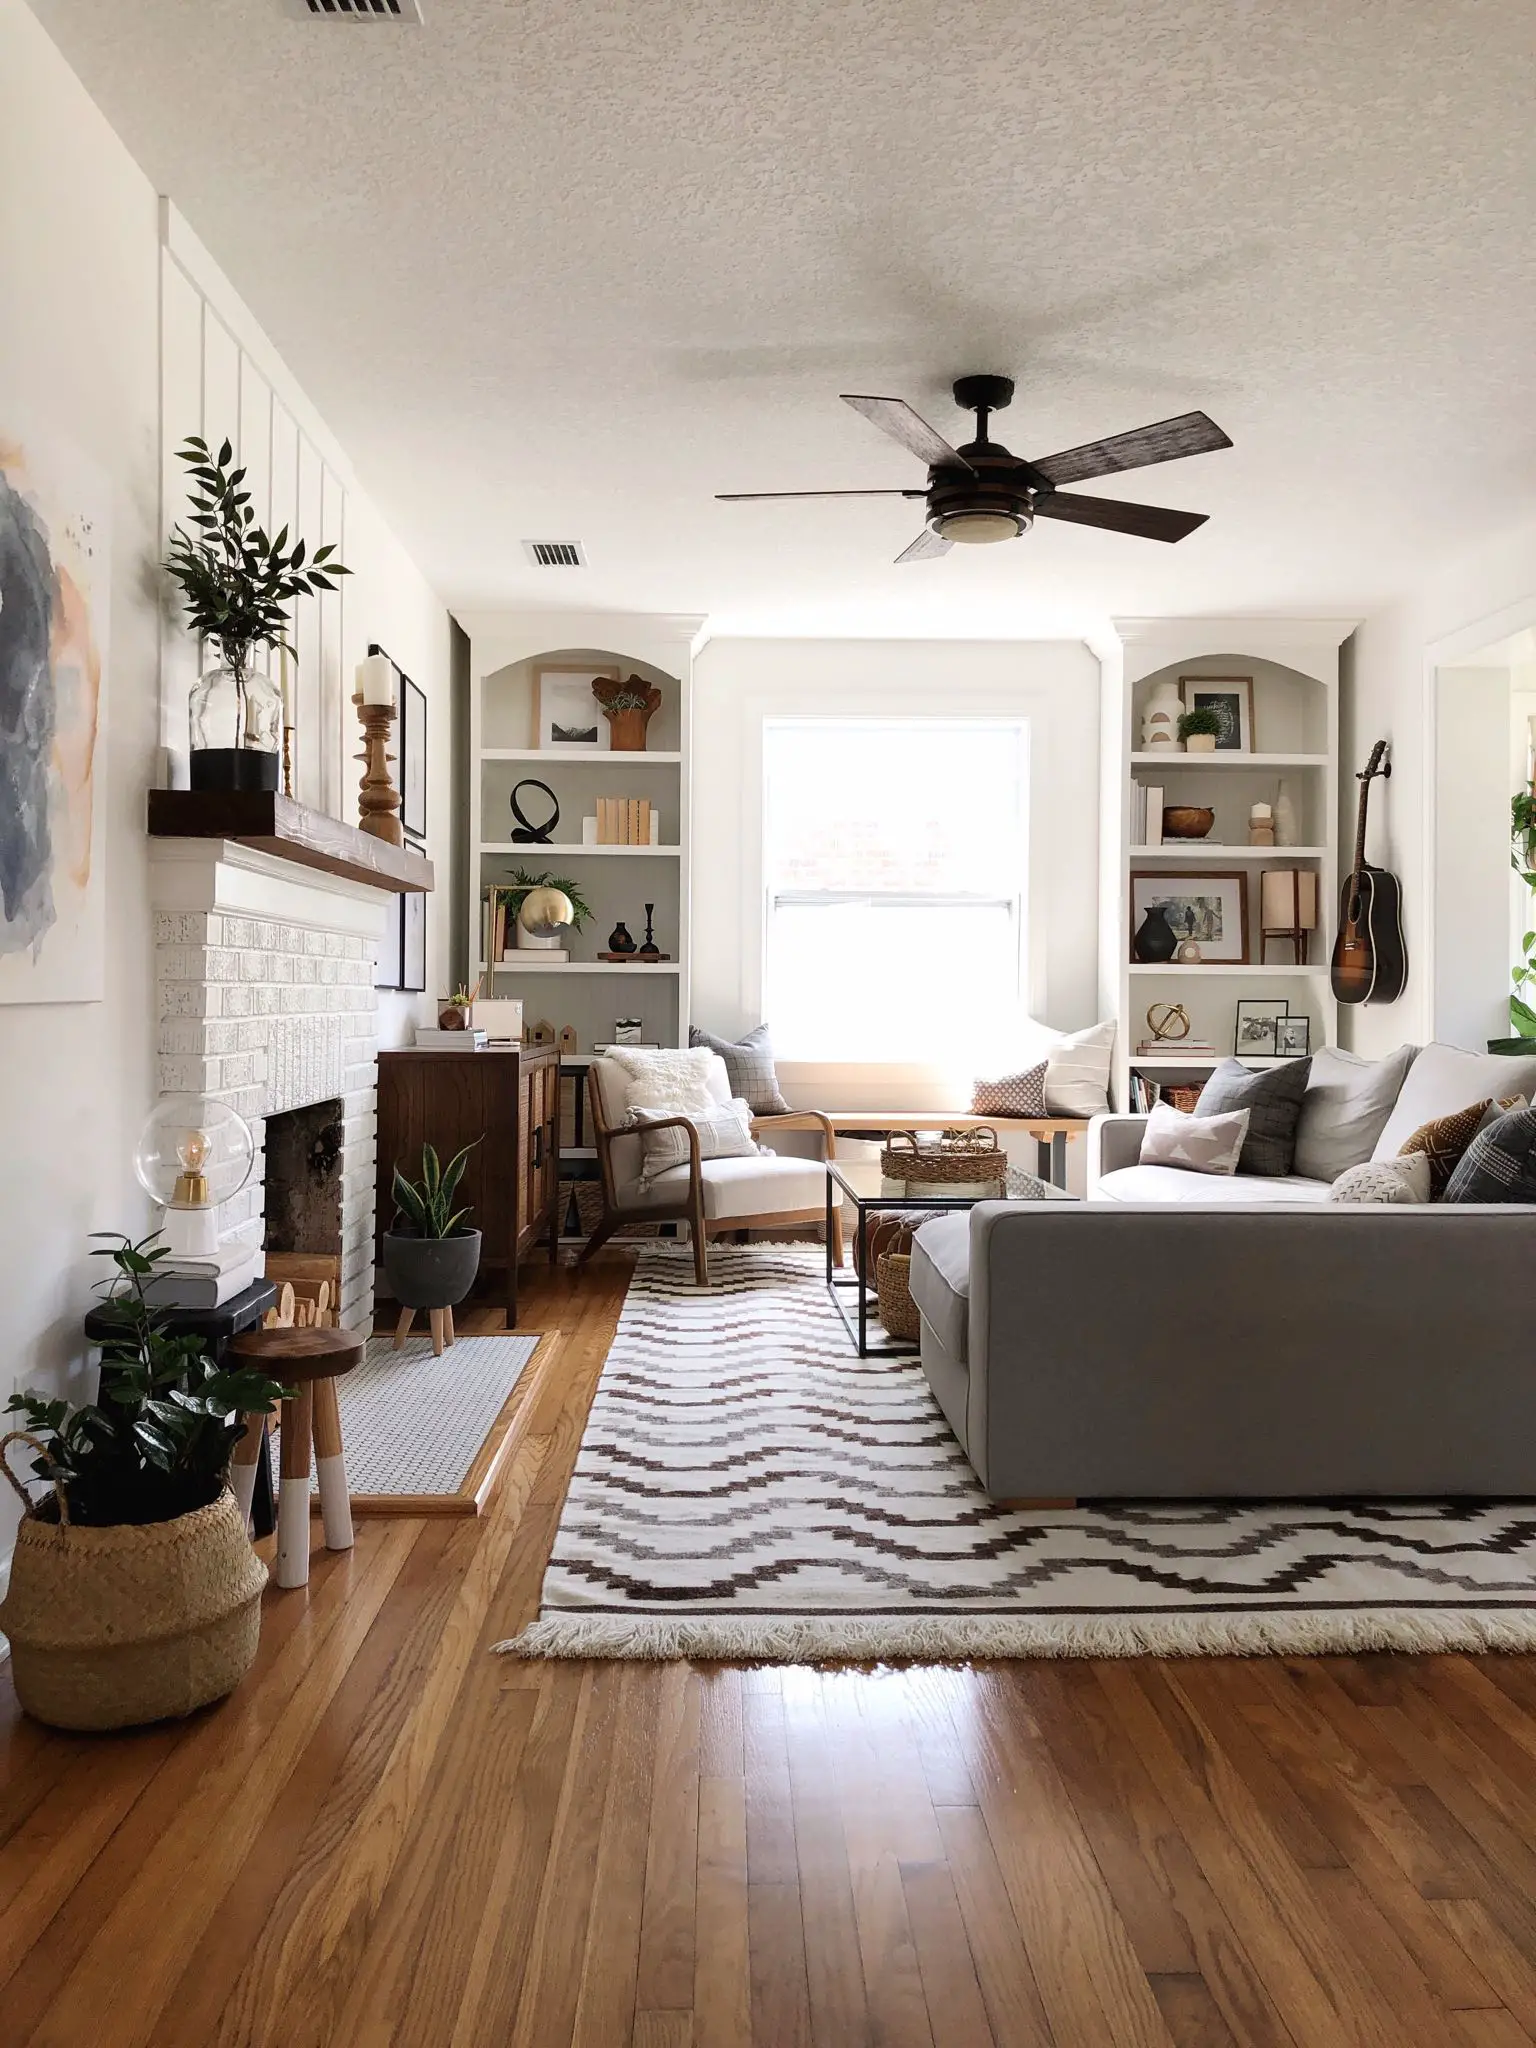 The Living Room: Something Old, Something New and Making It All Work Together